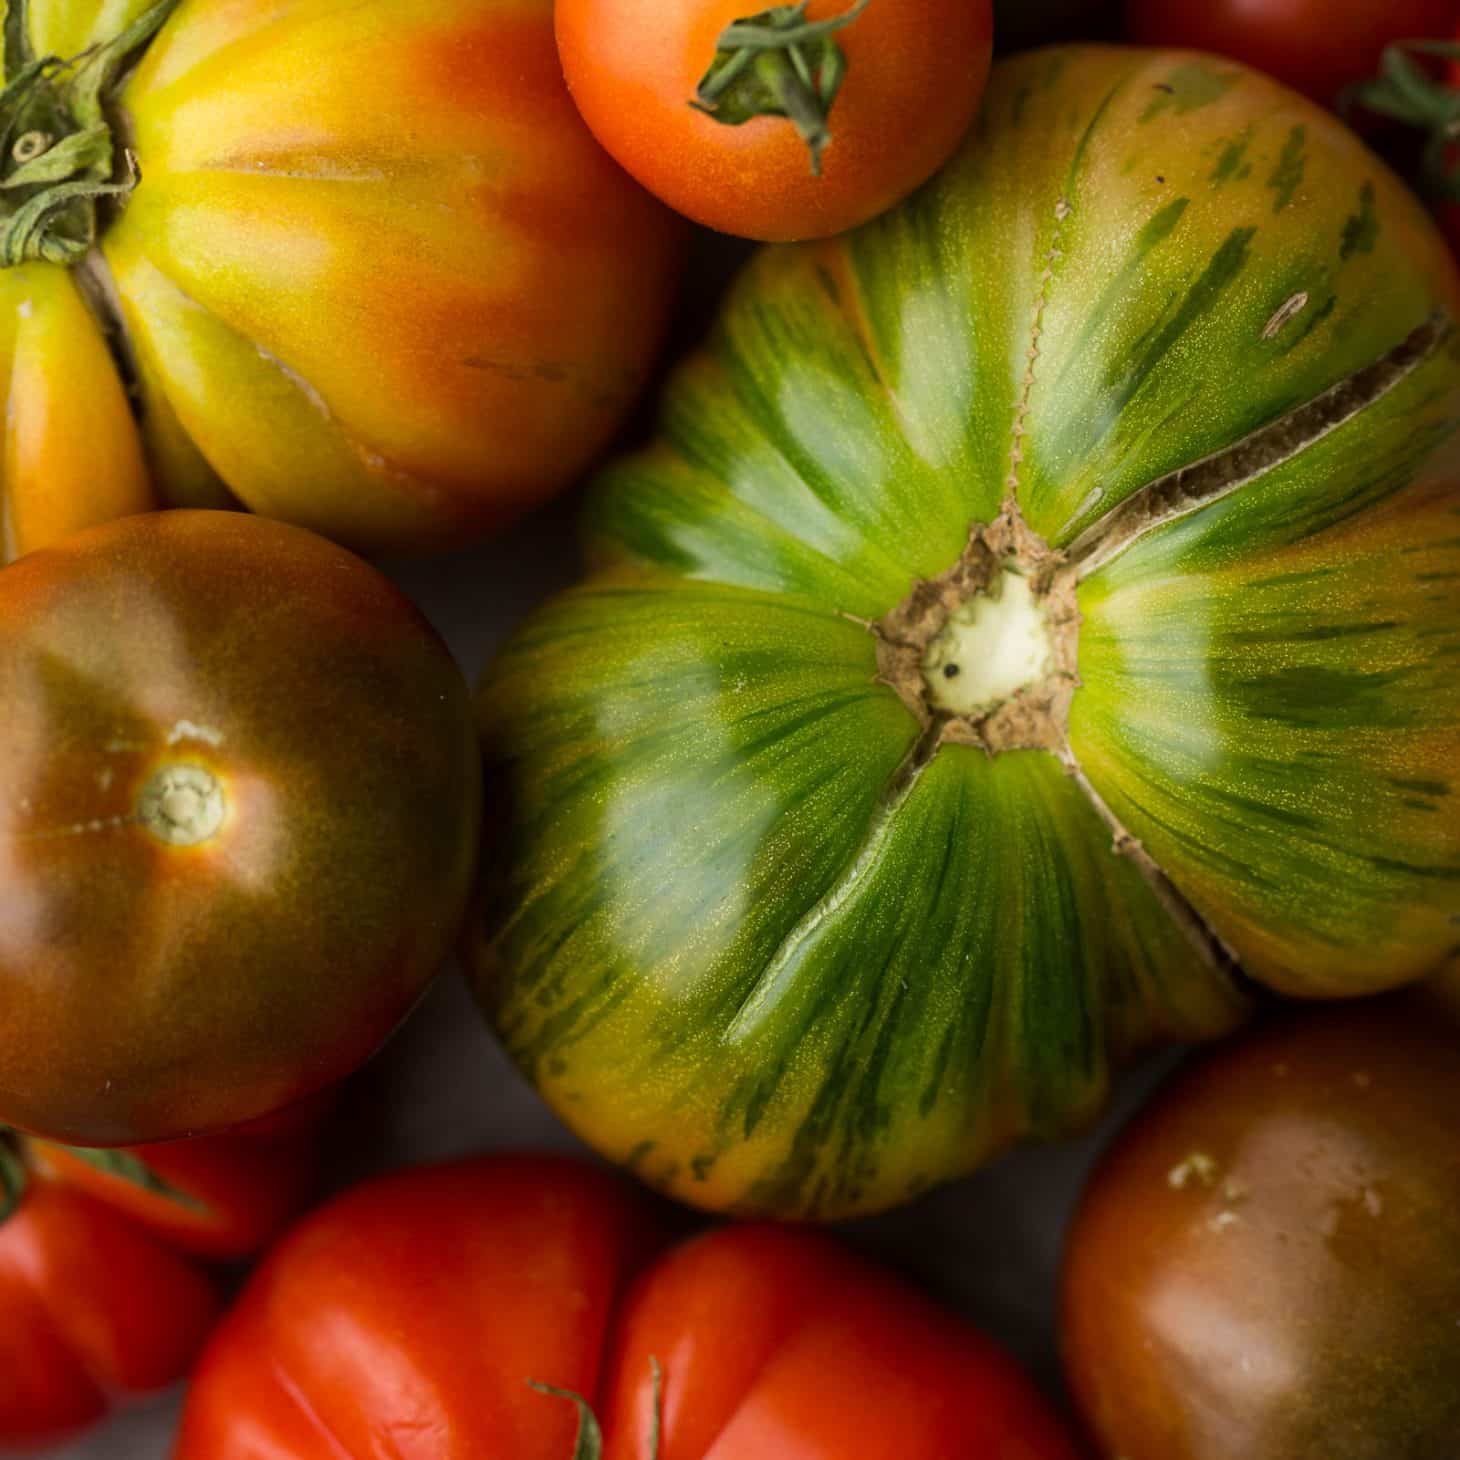 Tomatoes | Explore an Ingredient